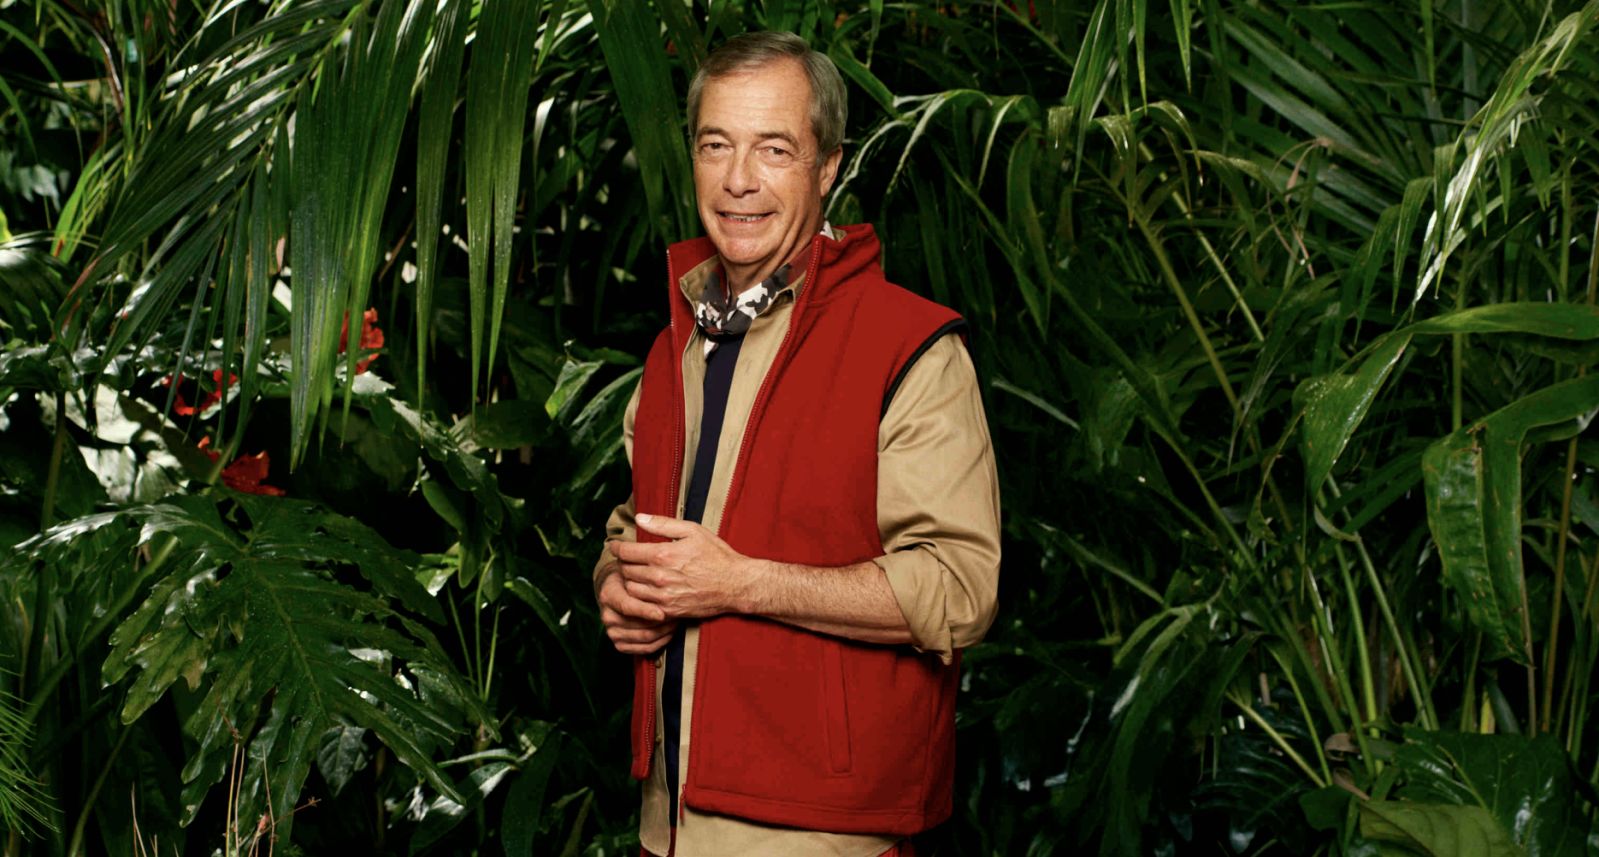 Farage on I'm a Celeb sparks nervousness in Tory ranks ahead of ...